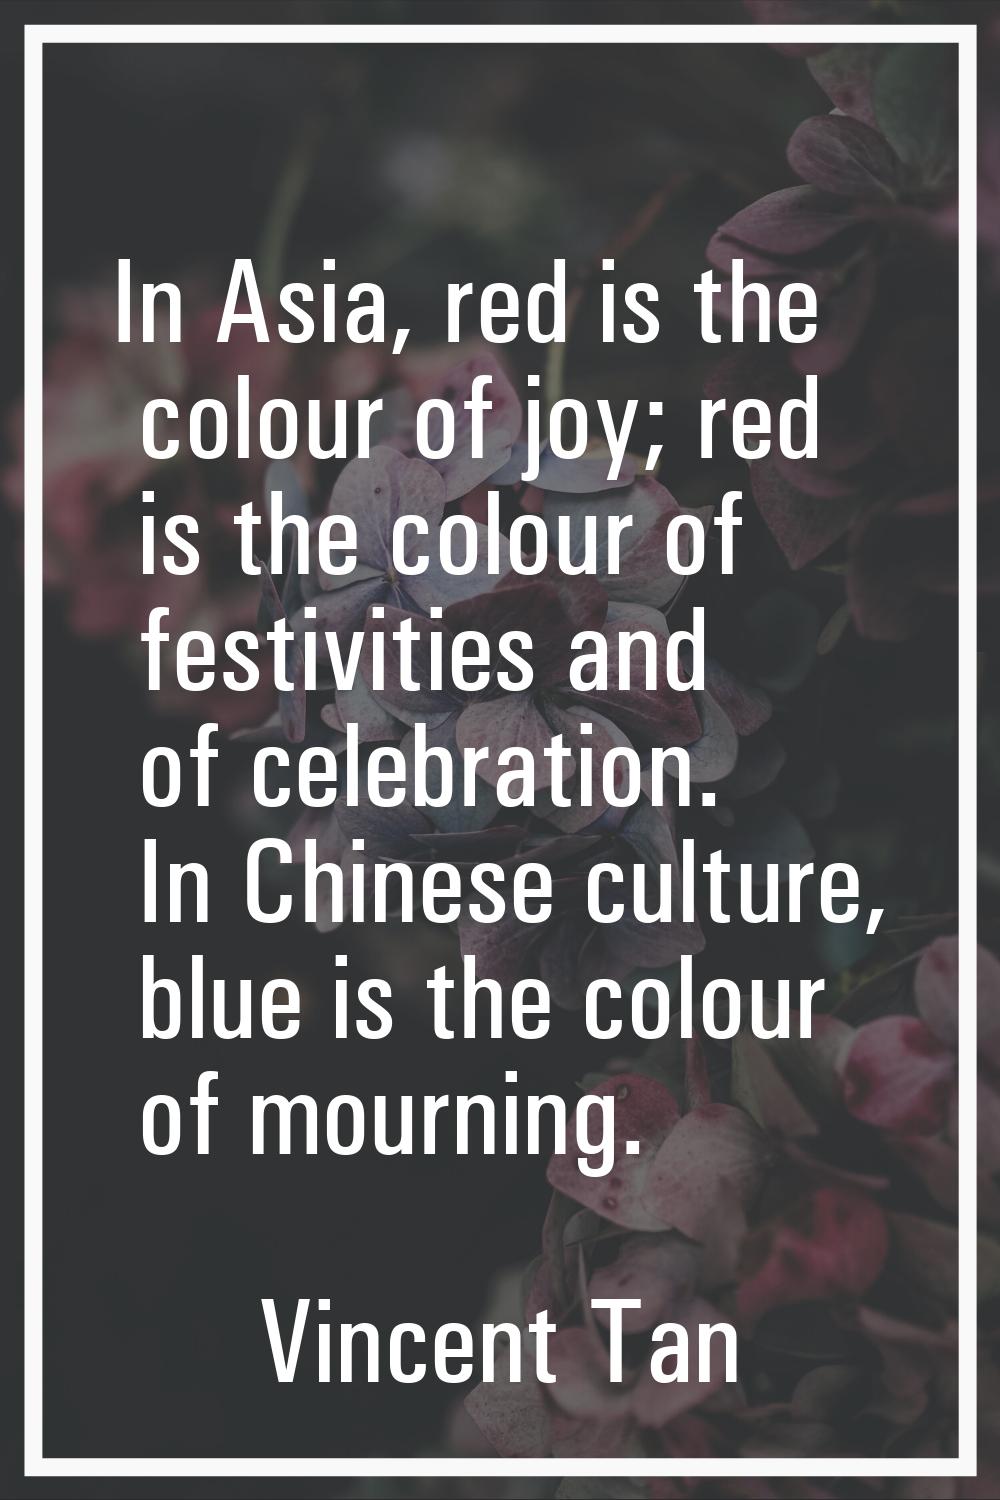 In Asia, red is the colour of joy; red is the colour of festivities and of celebration. In Chinese 